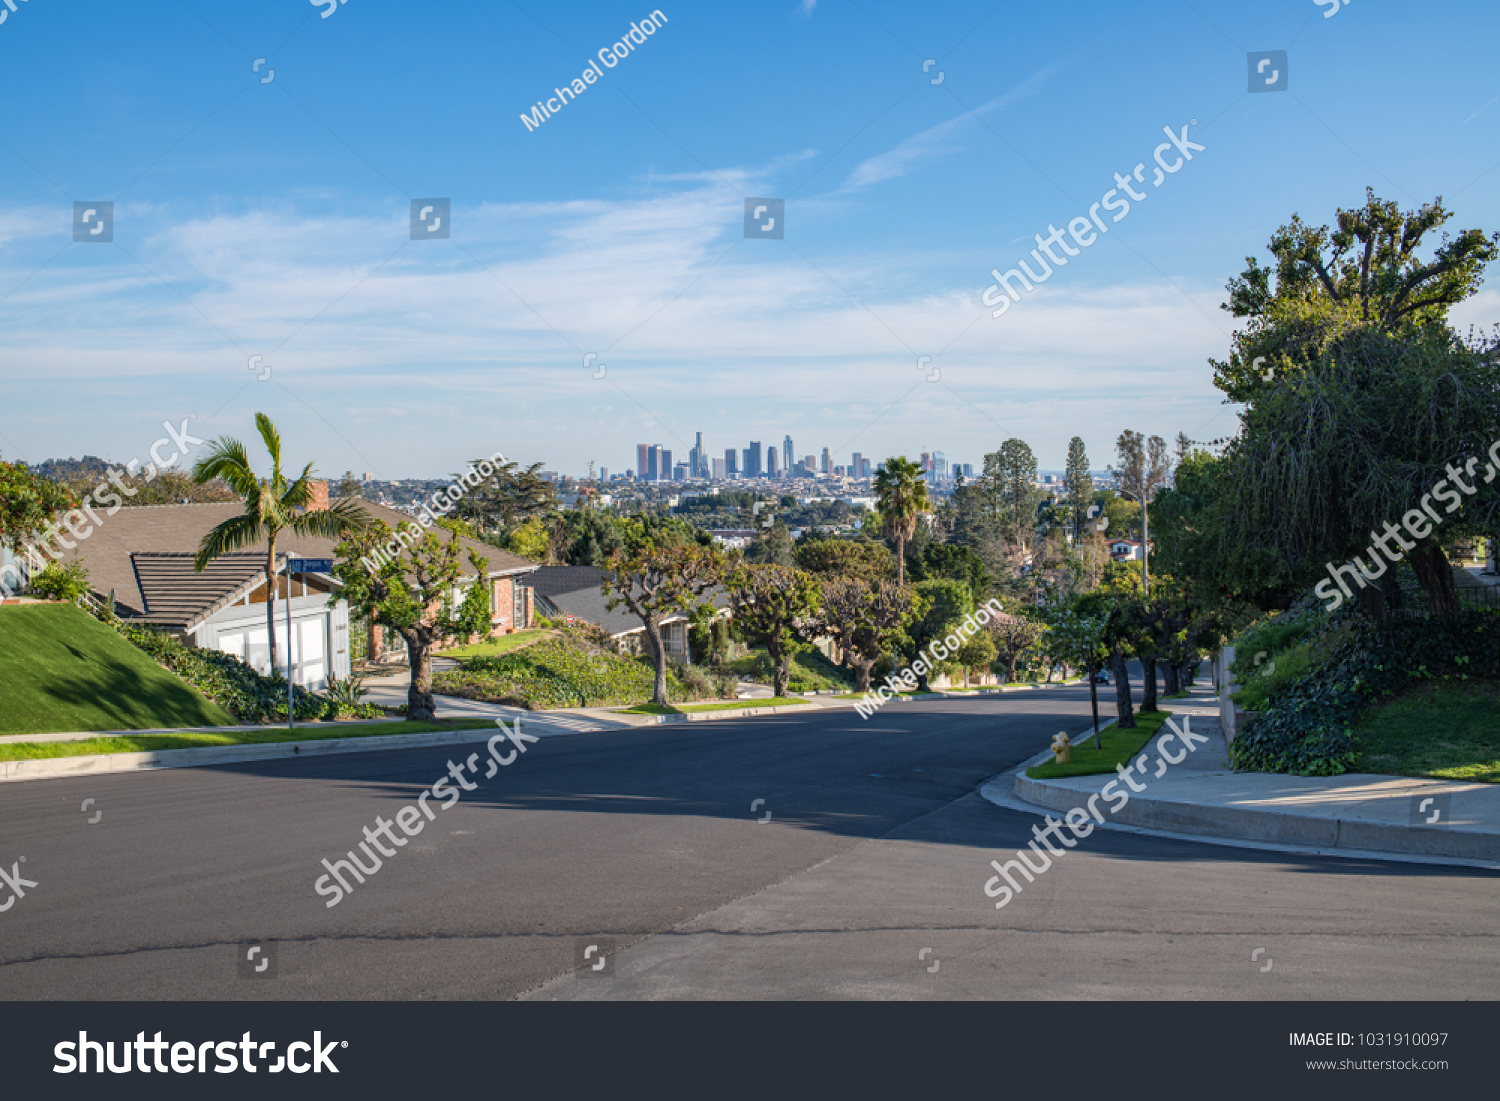 Los Angeles, CA: February 16, 2018:  A Los Angeles residential street with the Downtown Los Angeles skyline in the background.  Los Angeles is the second largest city in the United States. #1031910097